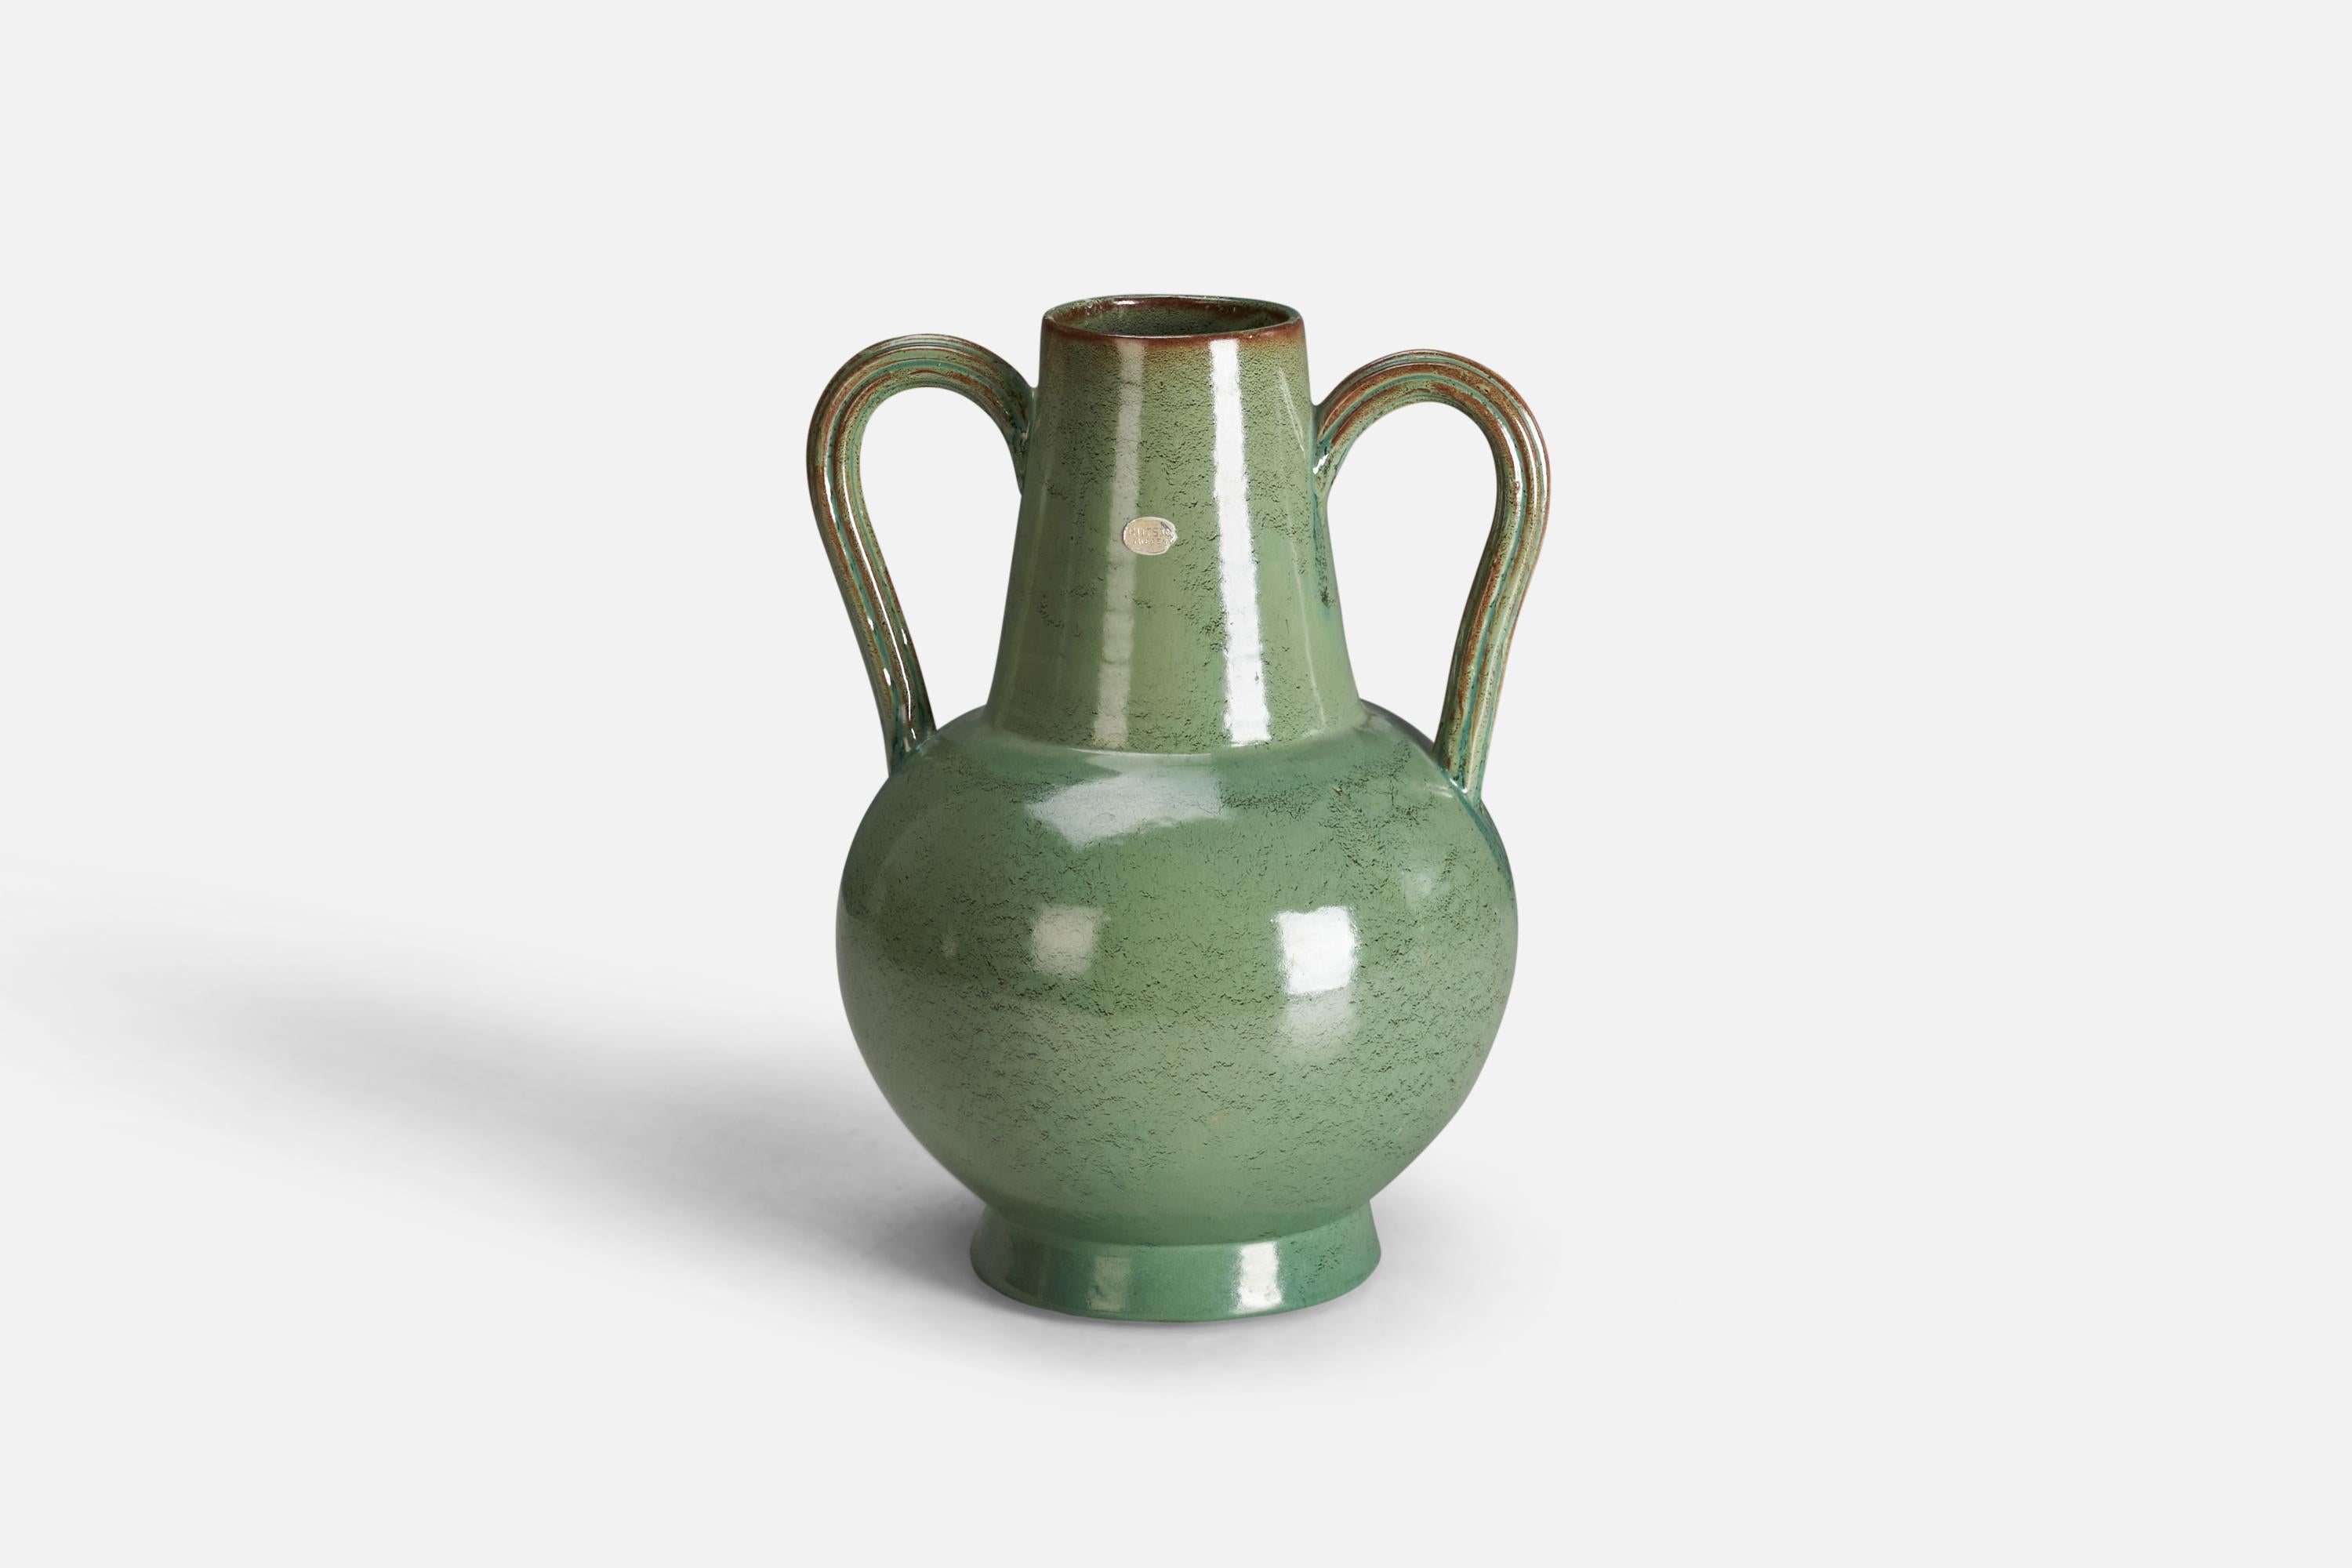 An green-glazed earthenware vase designed and produced by Nittsjö, 1930s.